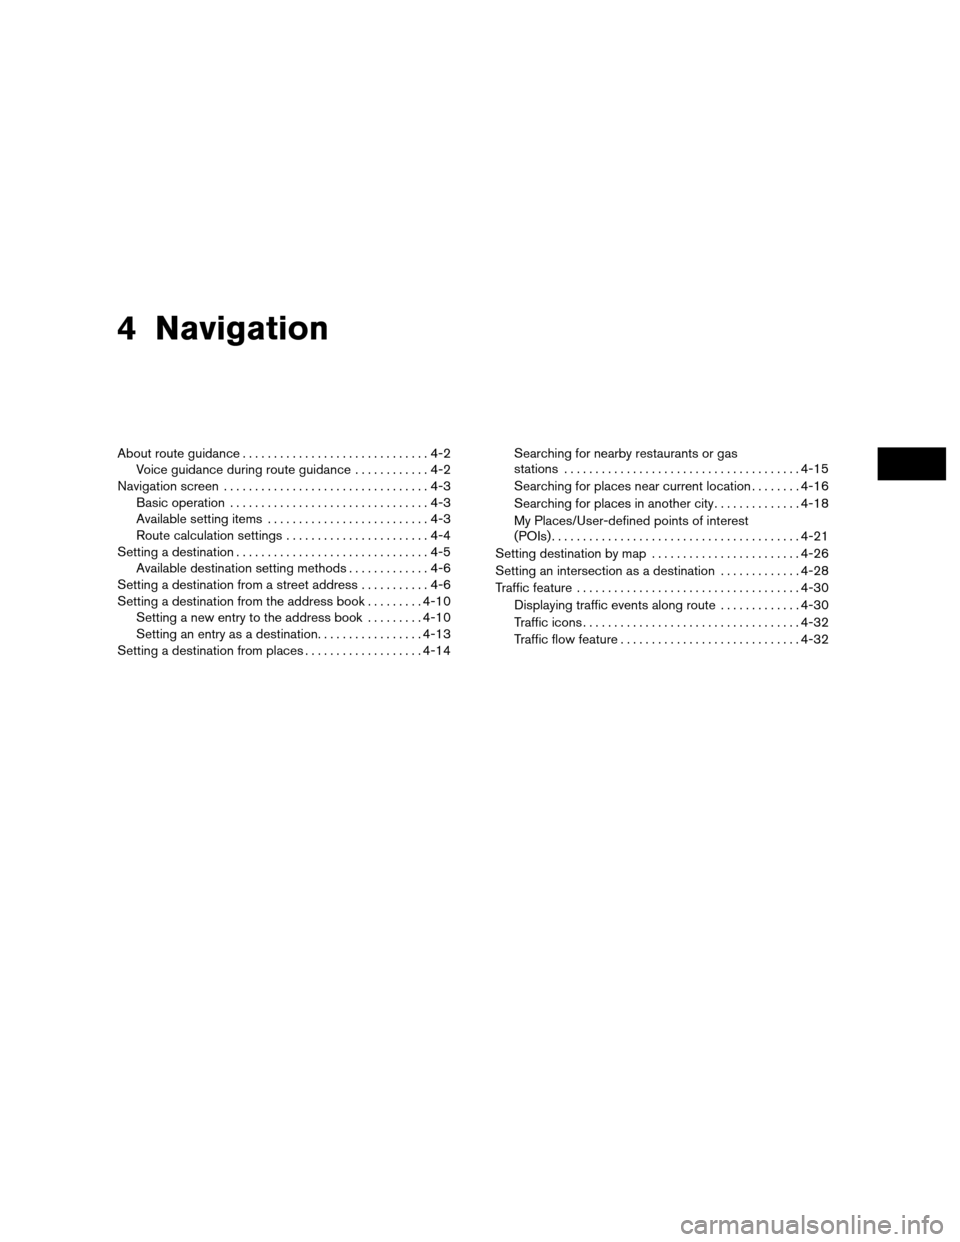 NISSAN ROGUE 2012 1.G LC Navigation Manual 4 Navigation
About route guidance..............................4-2
Voice guidance during route guidance ............4-2
Navigation screen .................................4-3
Basic operation .........